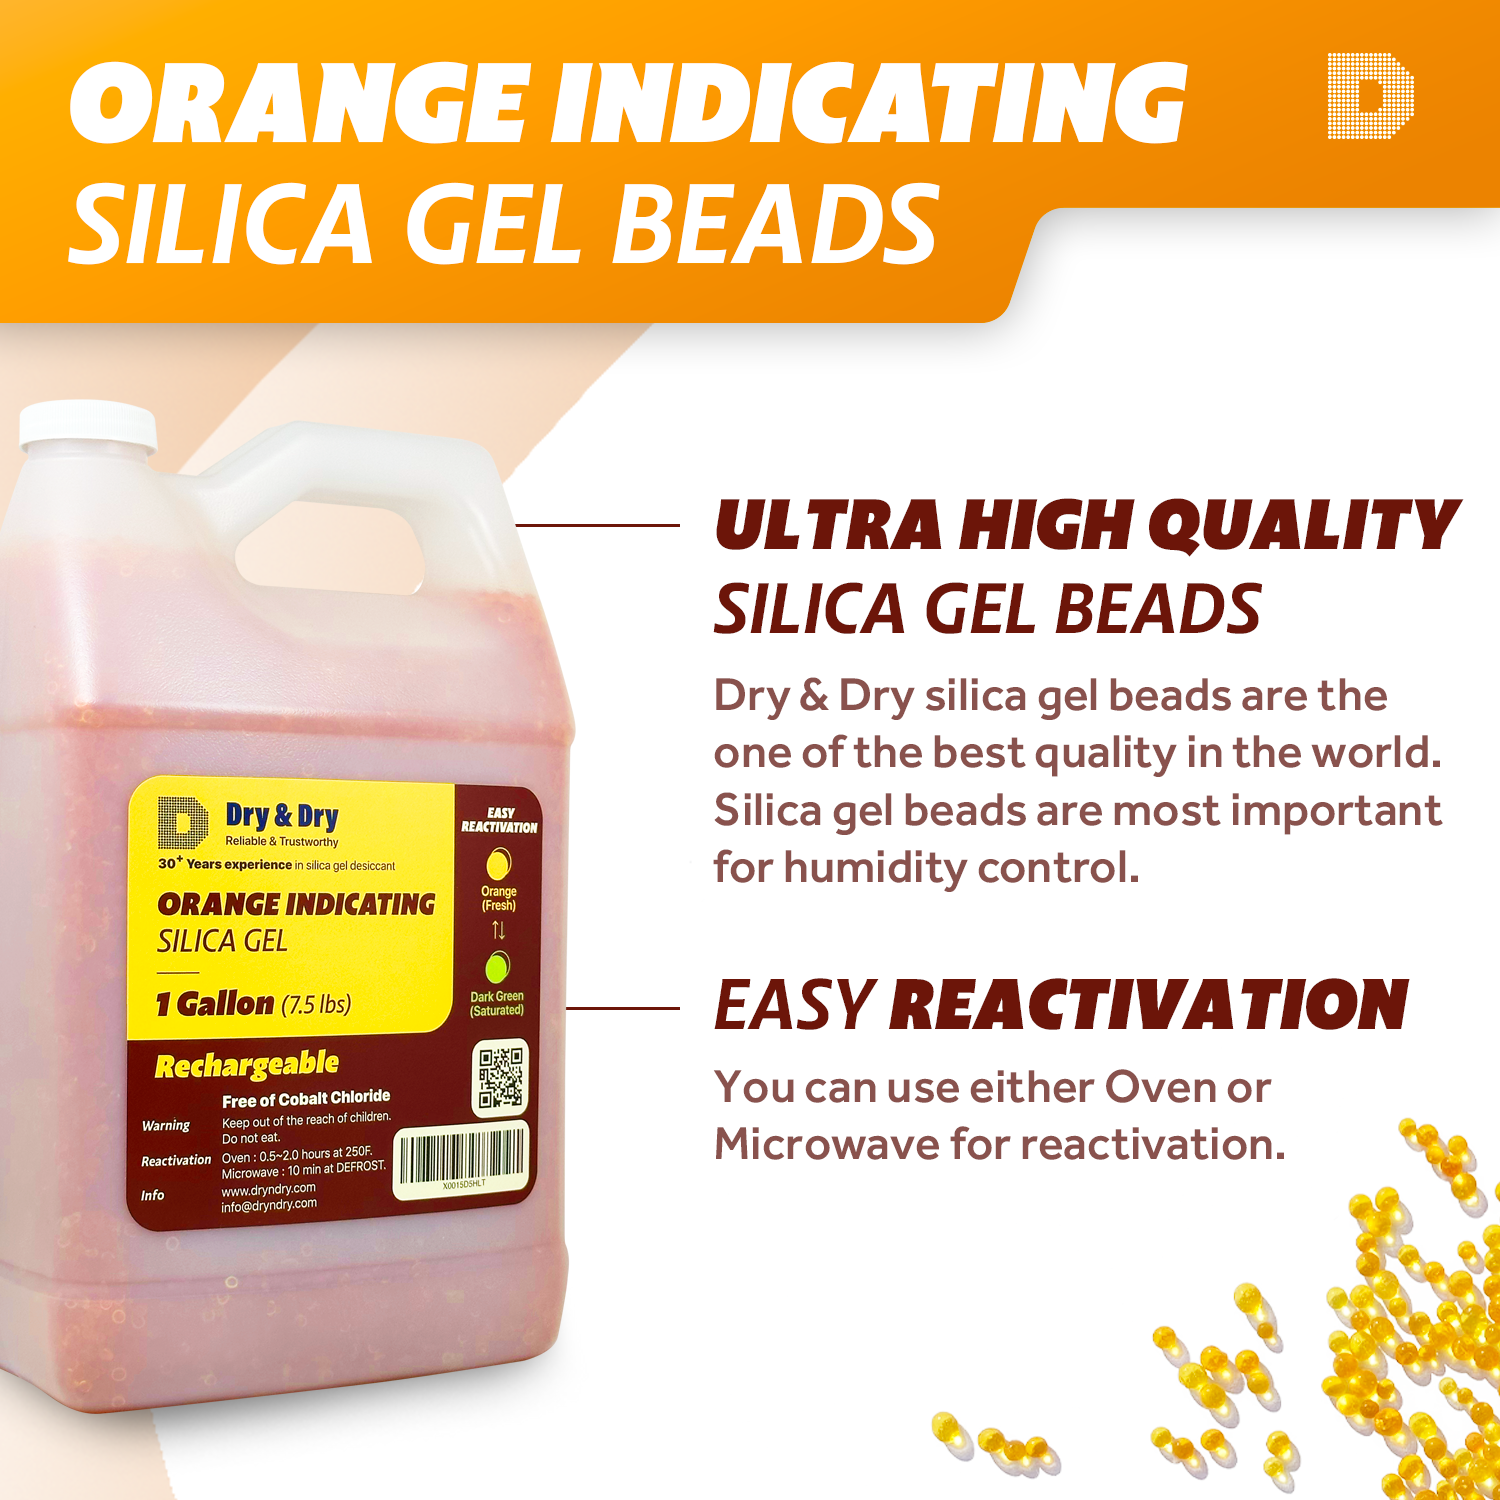 4 Gallon [30 LBS] Orange Premium Indicating Silica Gel Desiccant Beads(Industry Stand 3-5 mm) - RECHARGEABLE